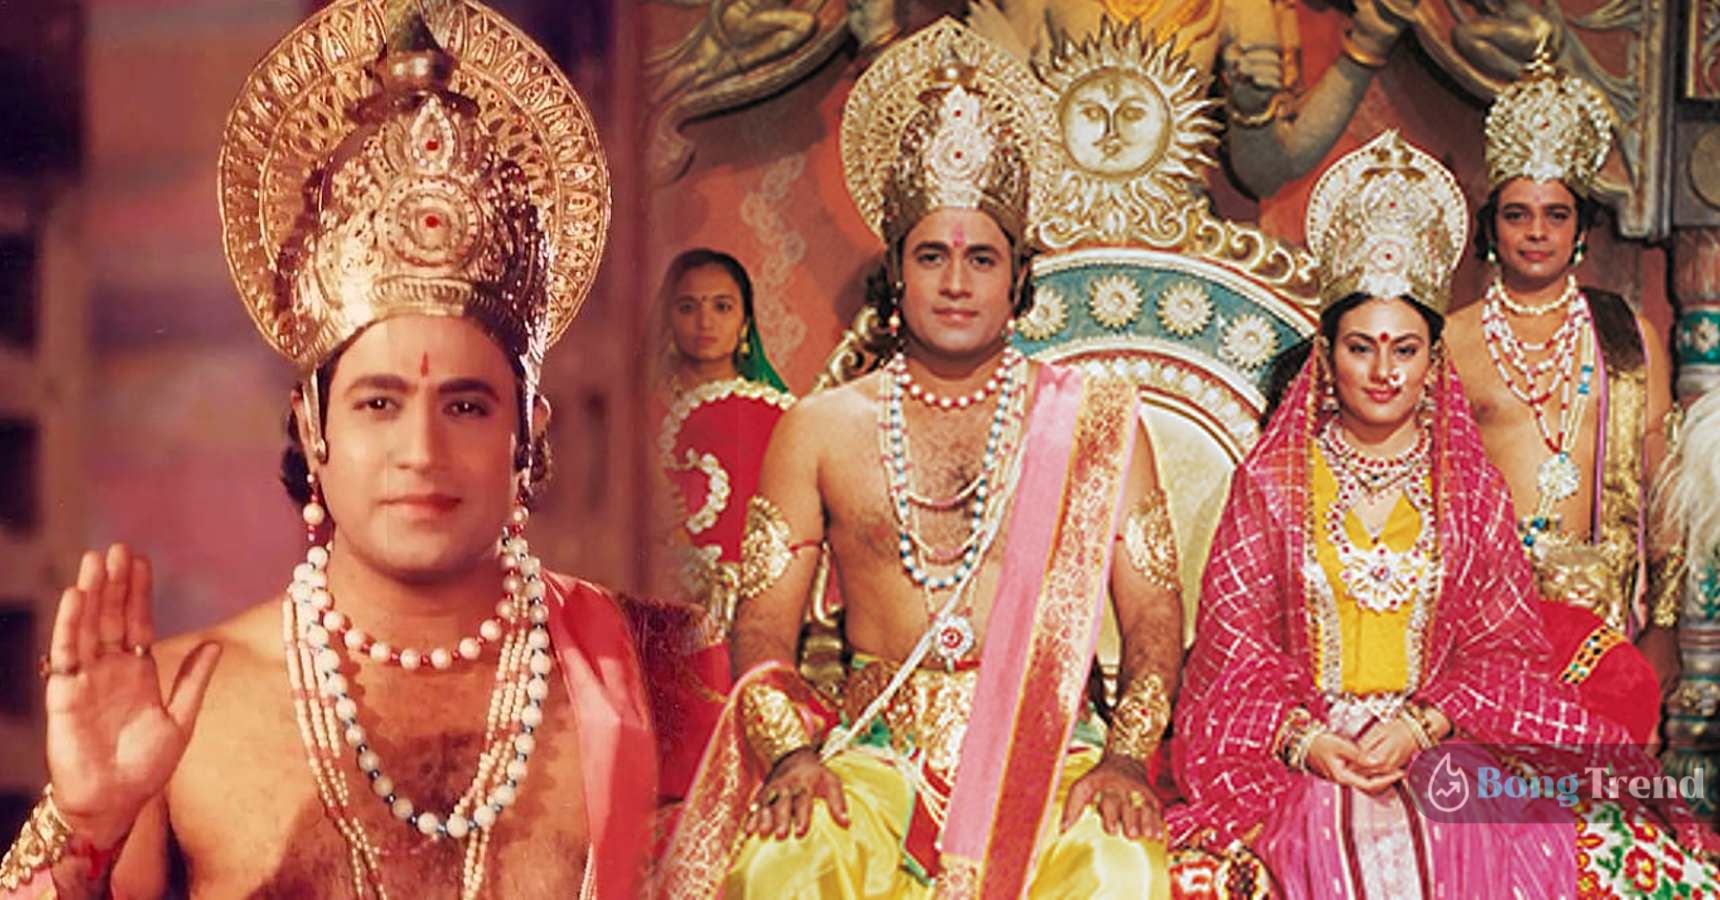 Real Budget and revenue of Ramayana Serial 1987 might put bollywood in shame